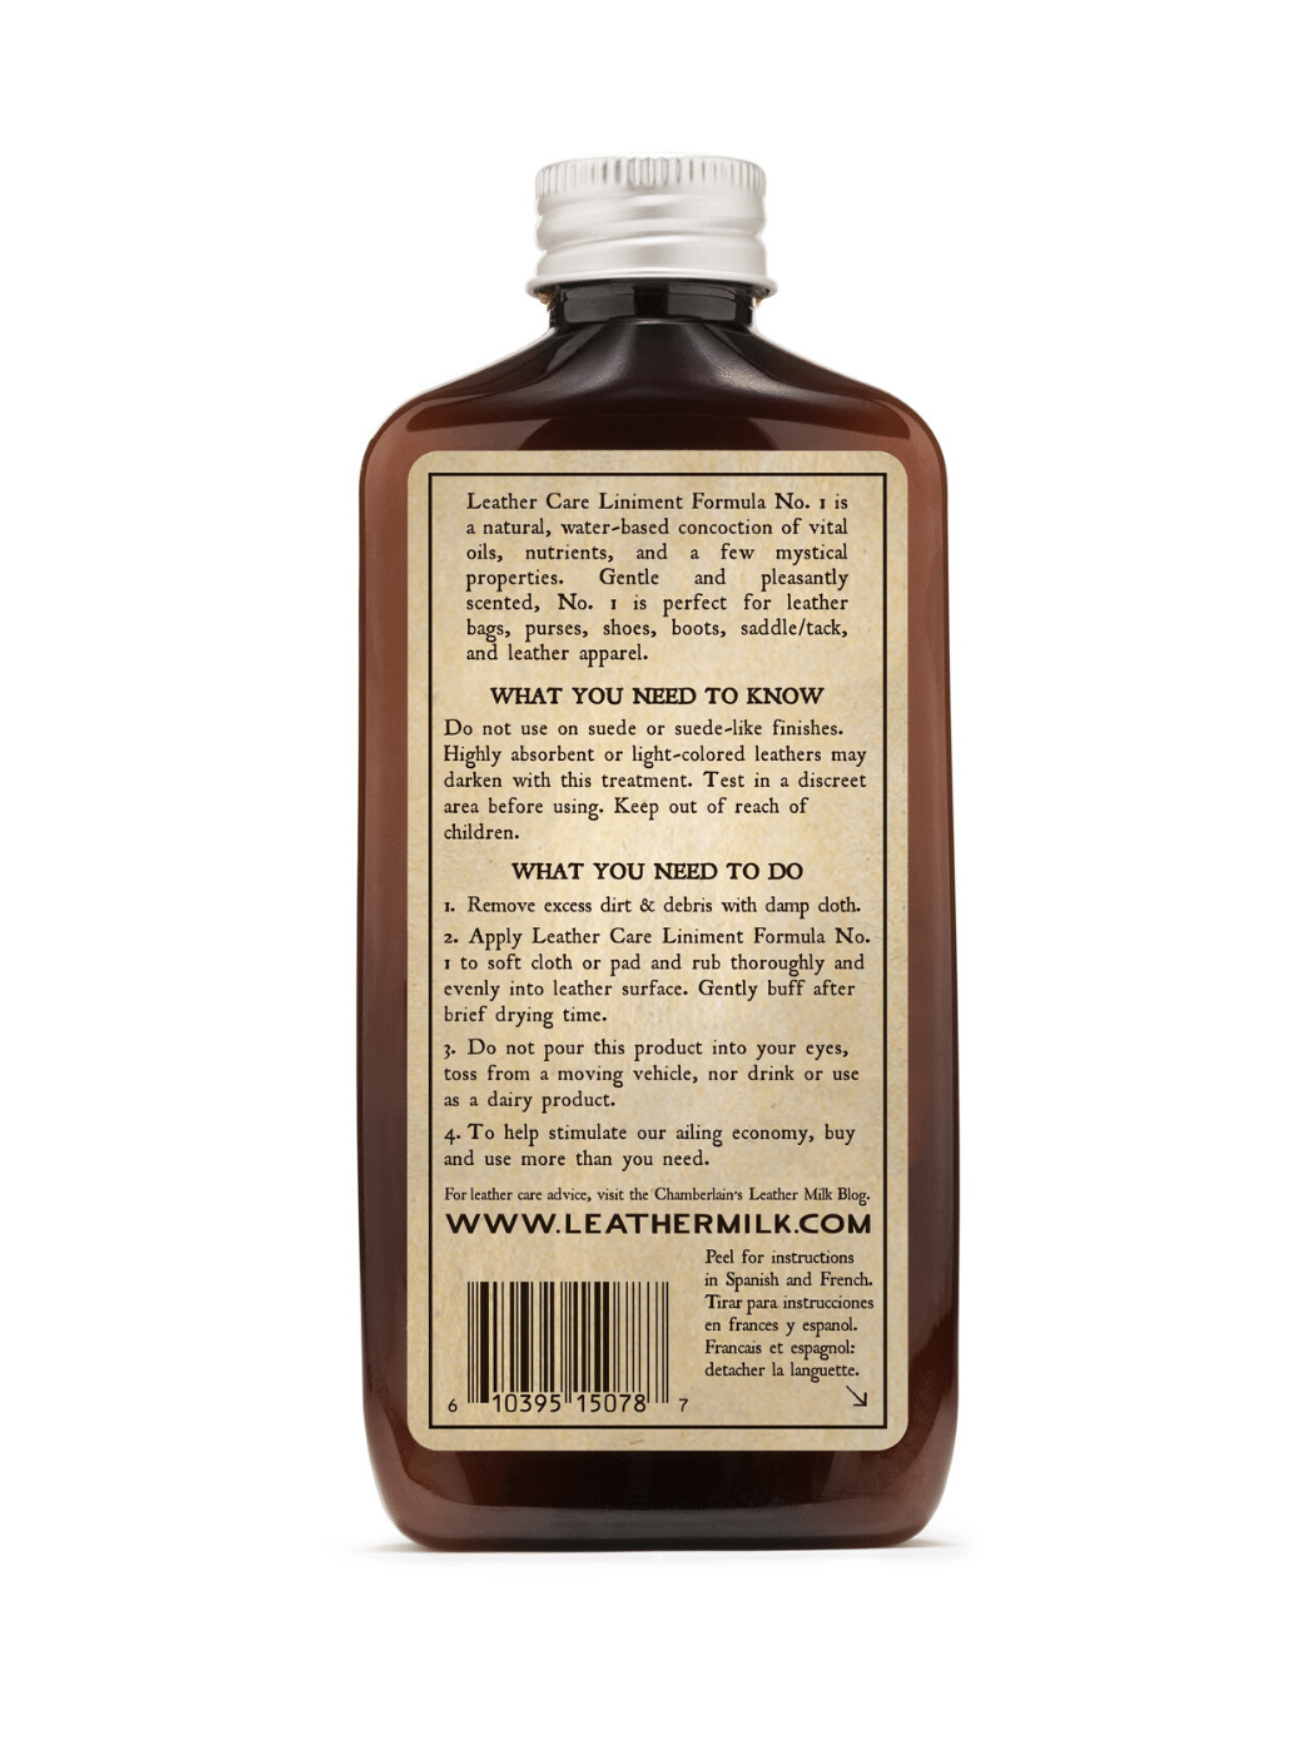 Chamberlain's Leather Conditioner Liniment